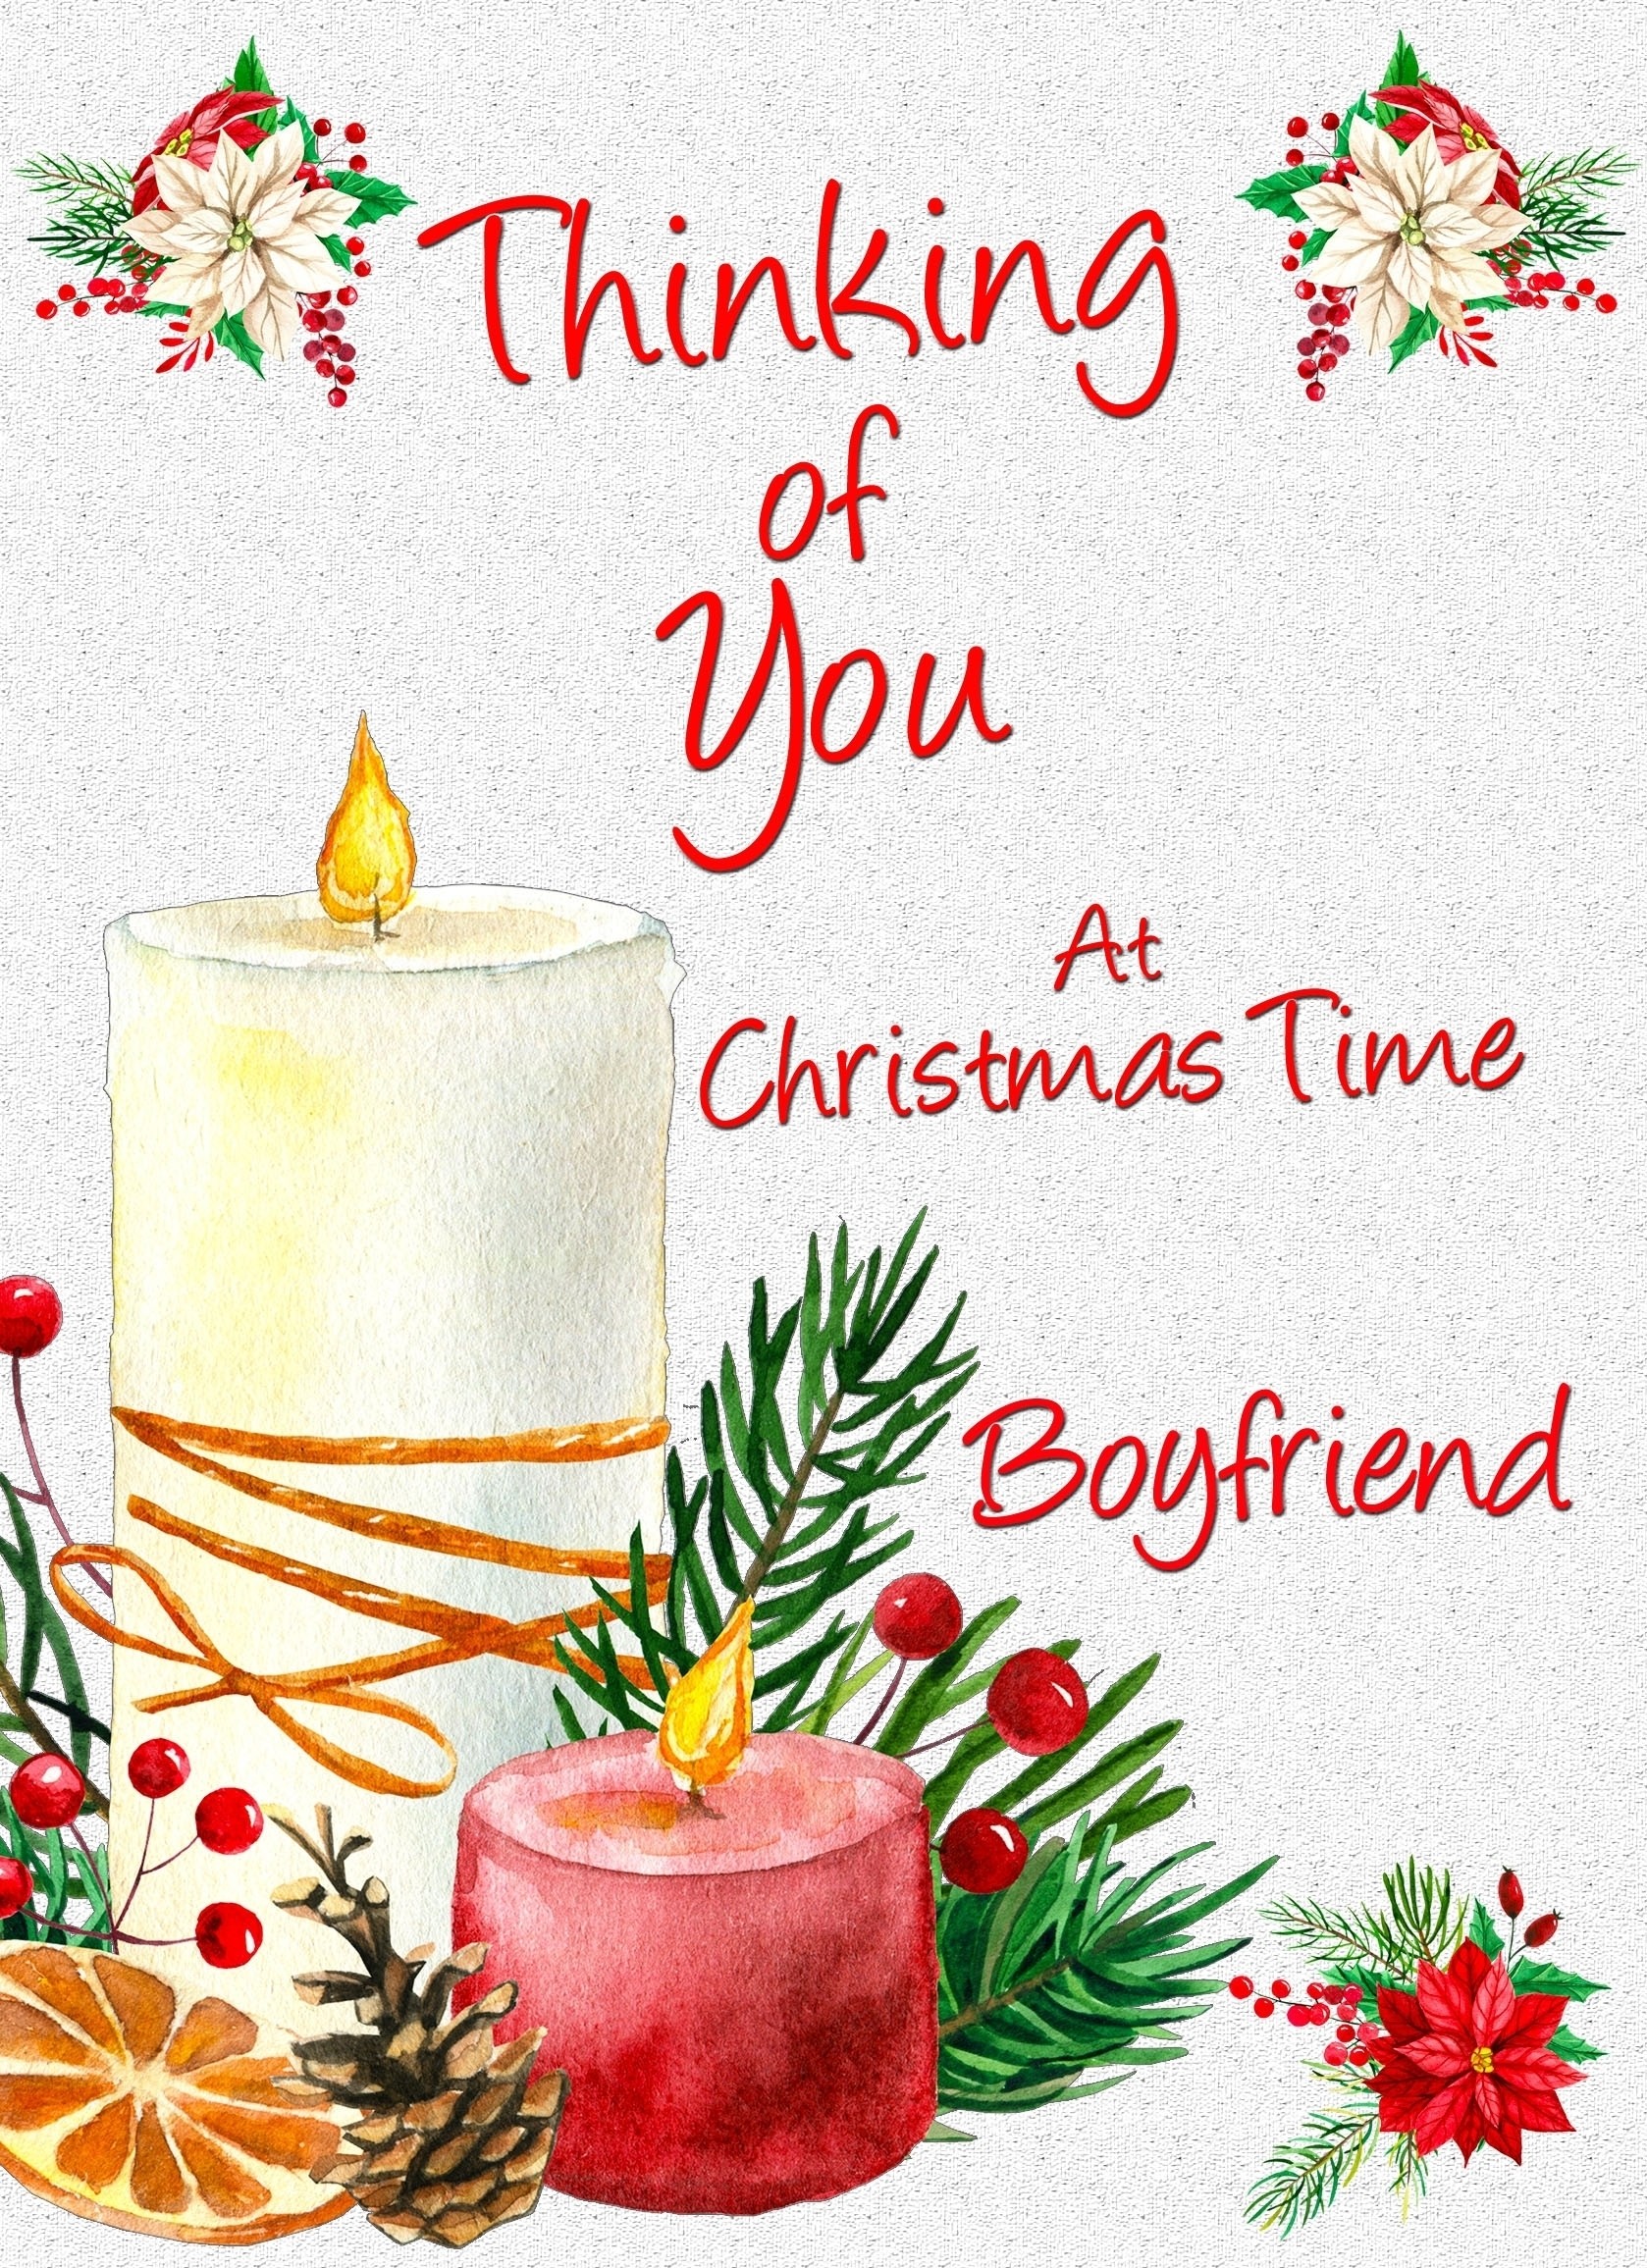 Thinking of You at Christmas Card For Boyfriend (Candle)